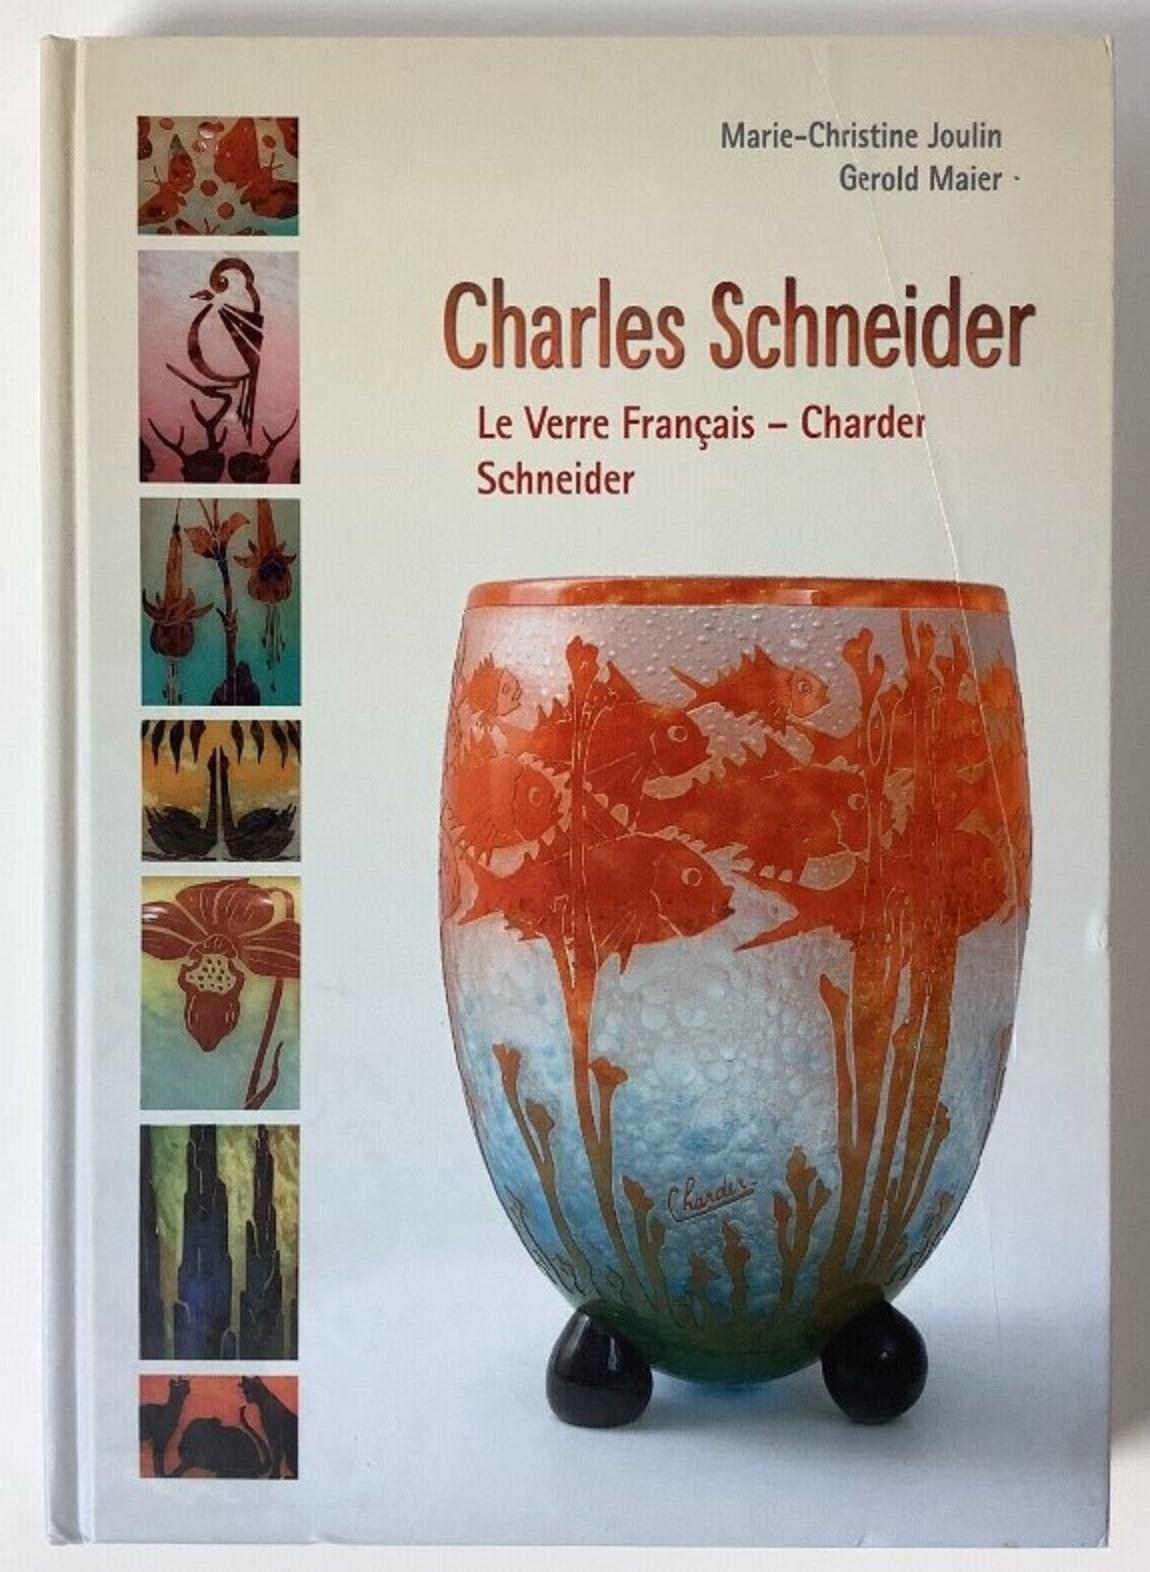 Vase Sign: Le Verre Francais  France
acid worked
Le Verre cameo glass was a separate line of art glass designed by Charles Schneider. Its production was made at the same time as the Schneider designed glasses 1918 –1933. But from 1919 the two lines